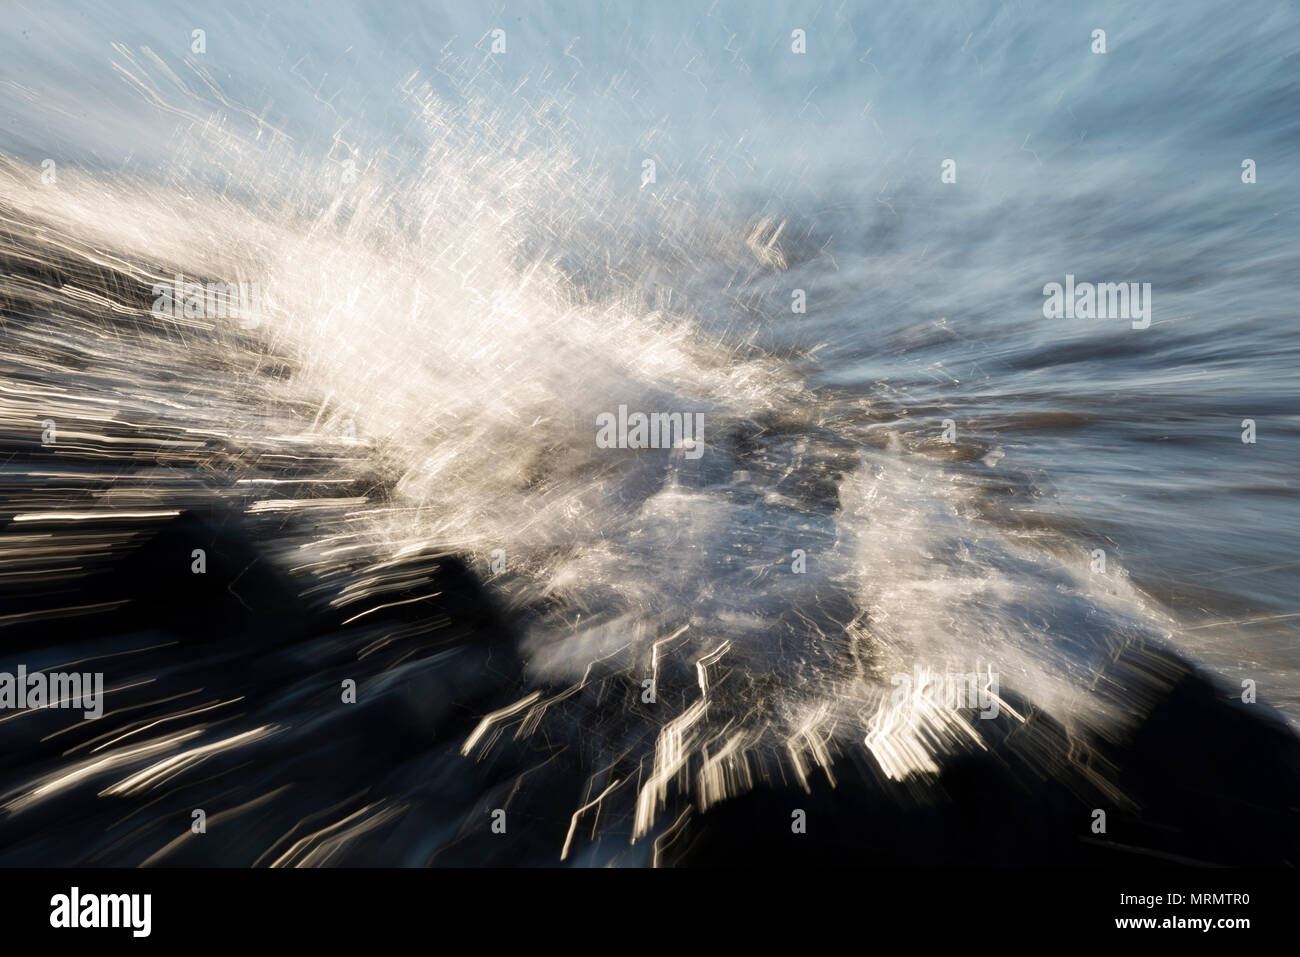 Abstract background zoom in zoom out technic photo of waves on the beach. Stock Photo